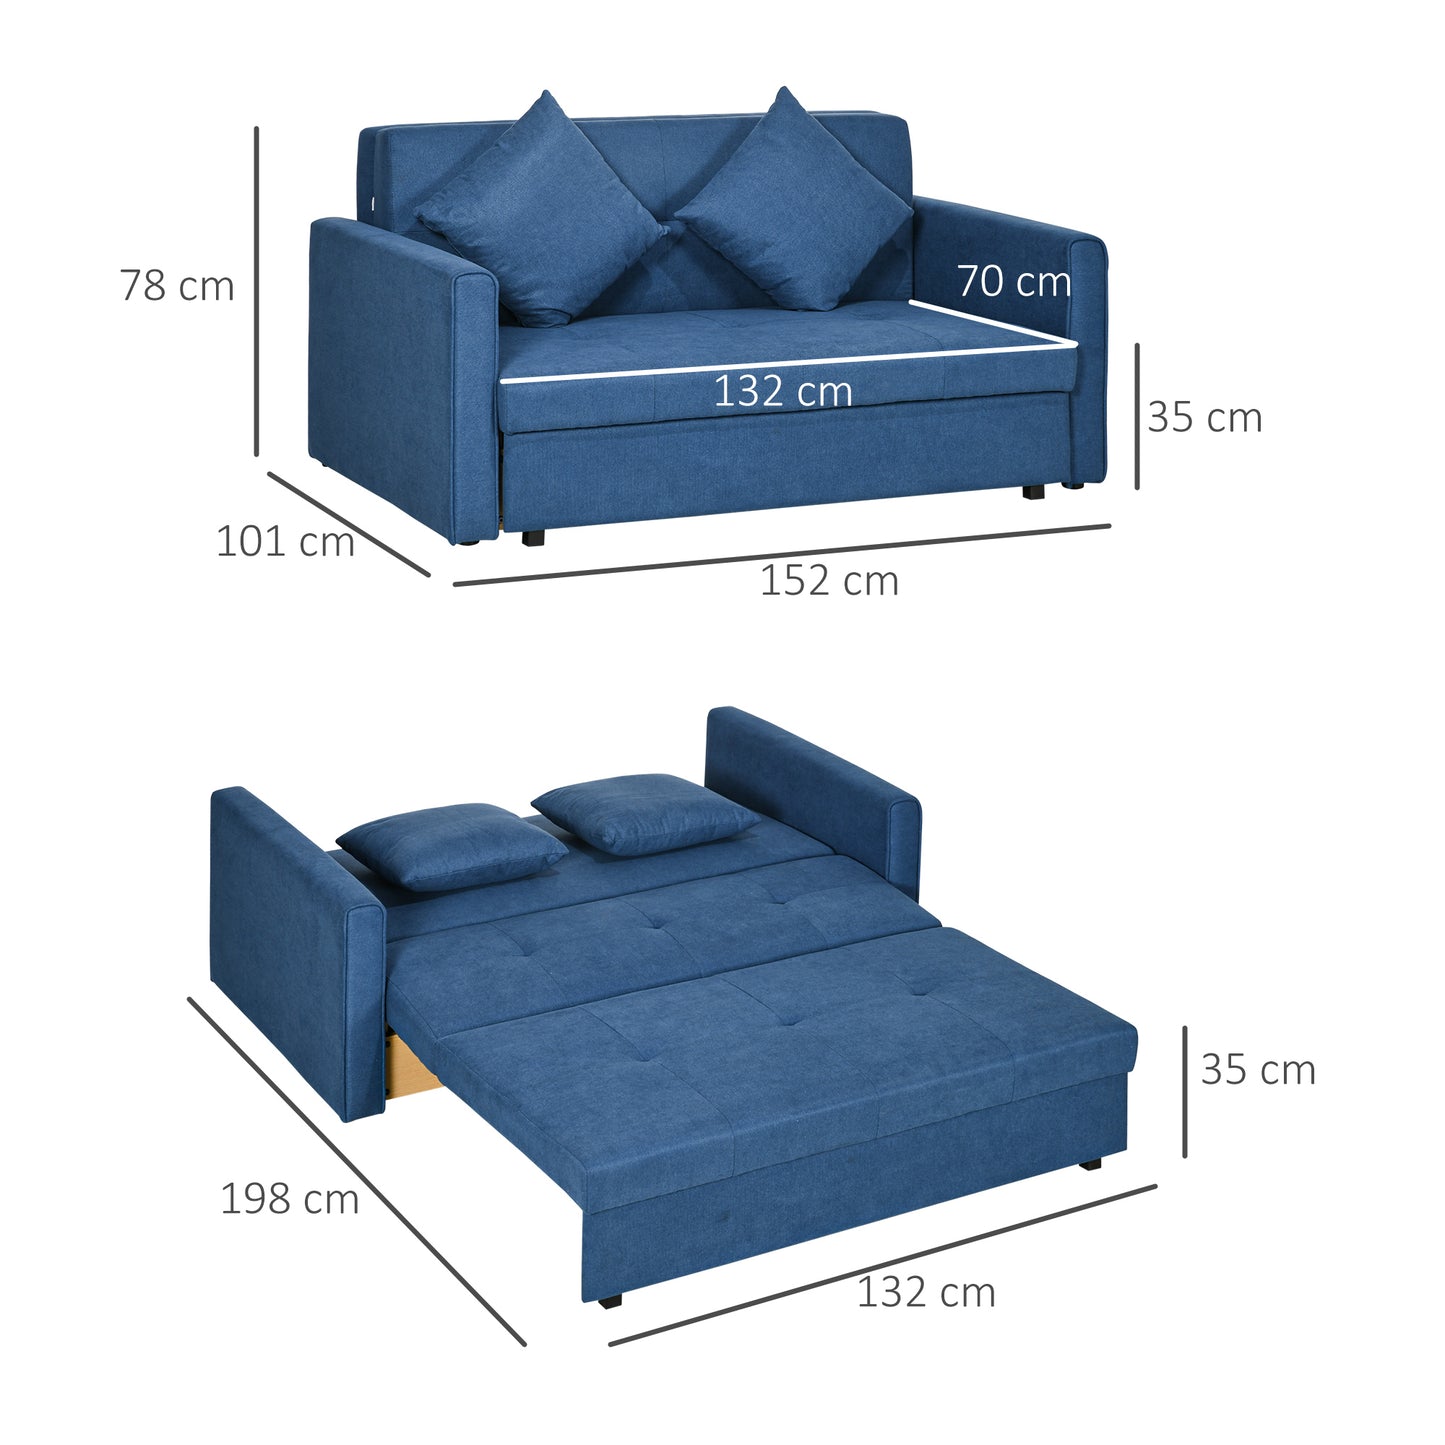 HOMCOM 2 Seater Sofa Bed, Convertible Bed Settee, Modern Fabric Loveseat Sofa Couch w/ Cushions, Hidden Storage for Guest Room, Dark Blue